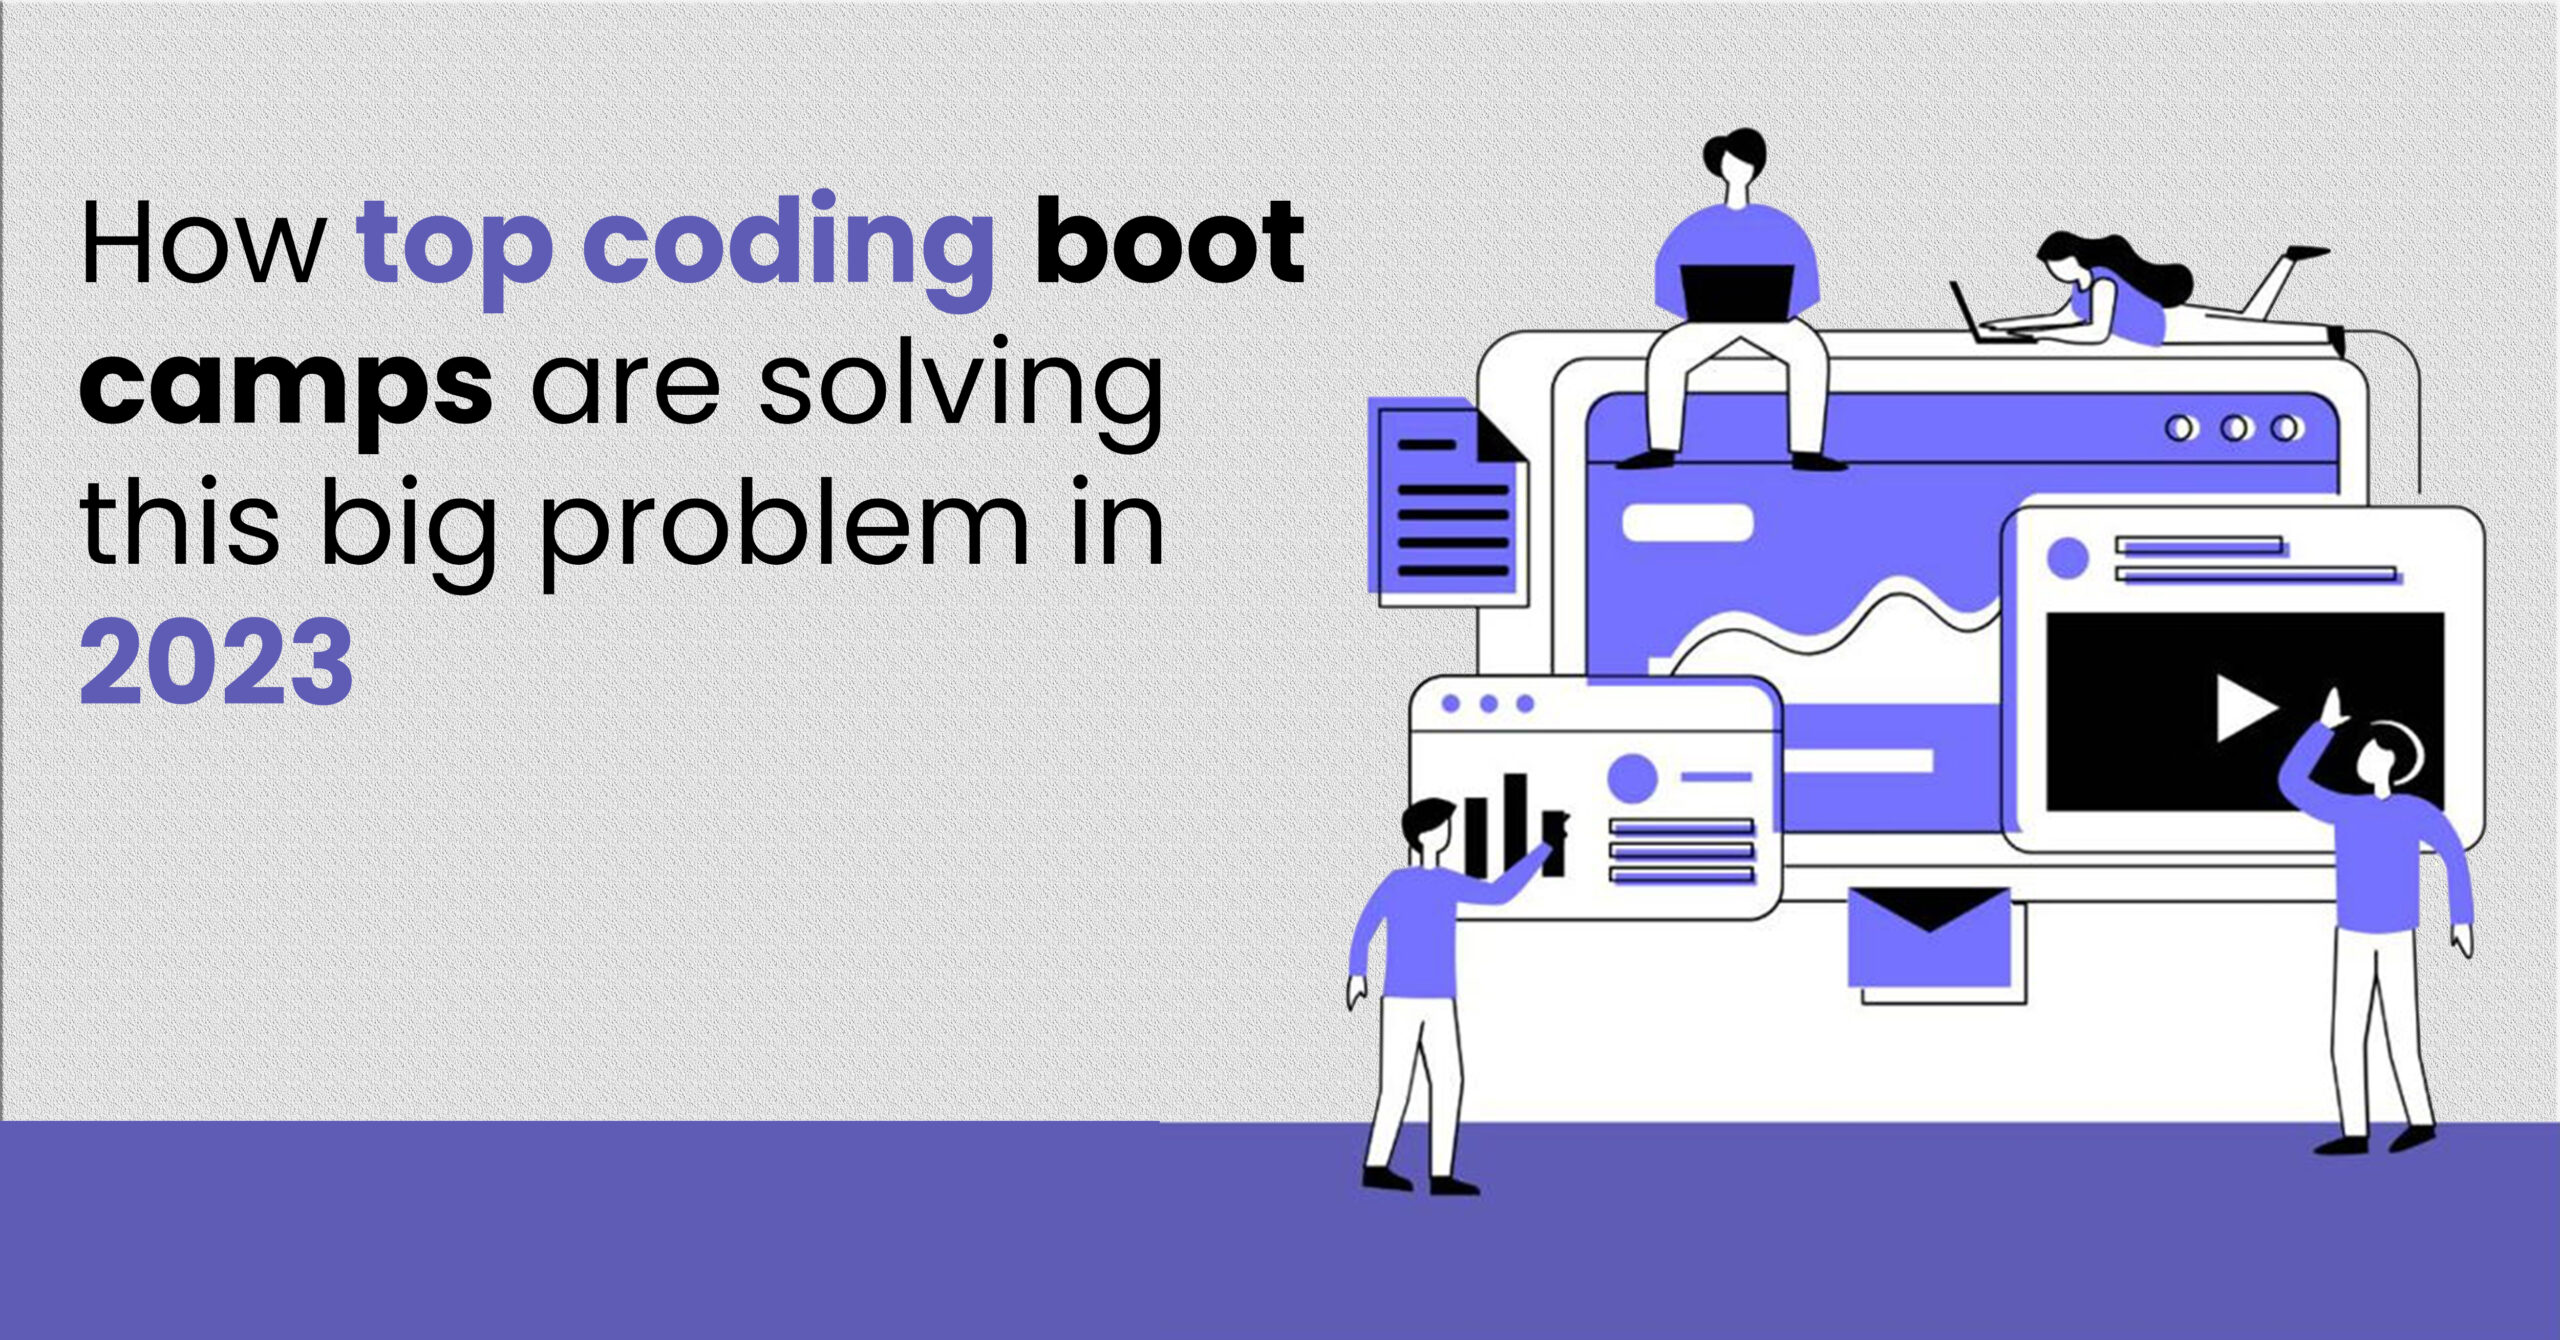 How top coding boot camps are solving this big problem in 2023